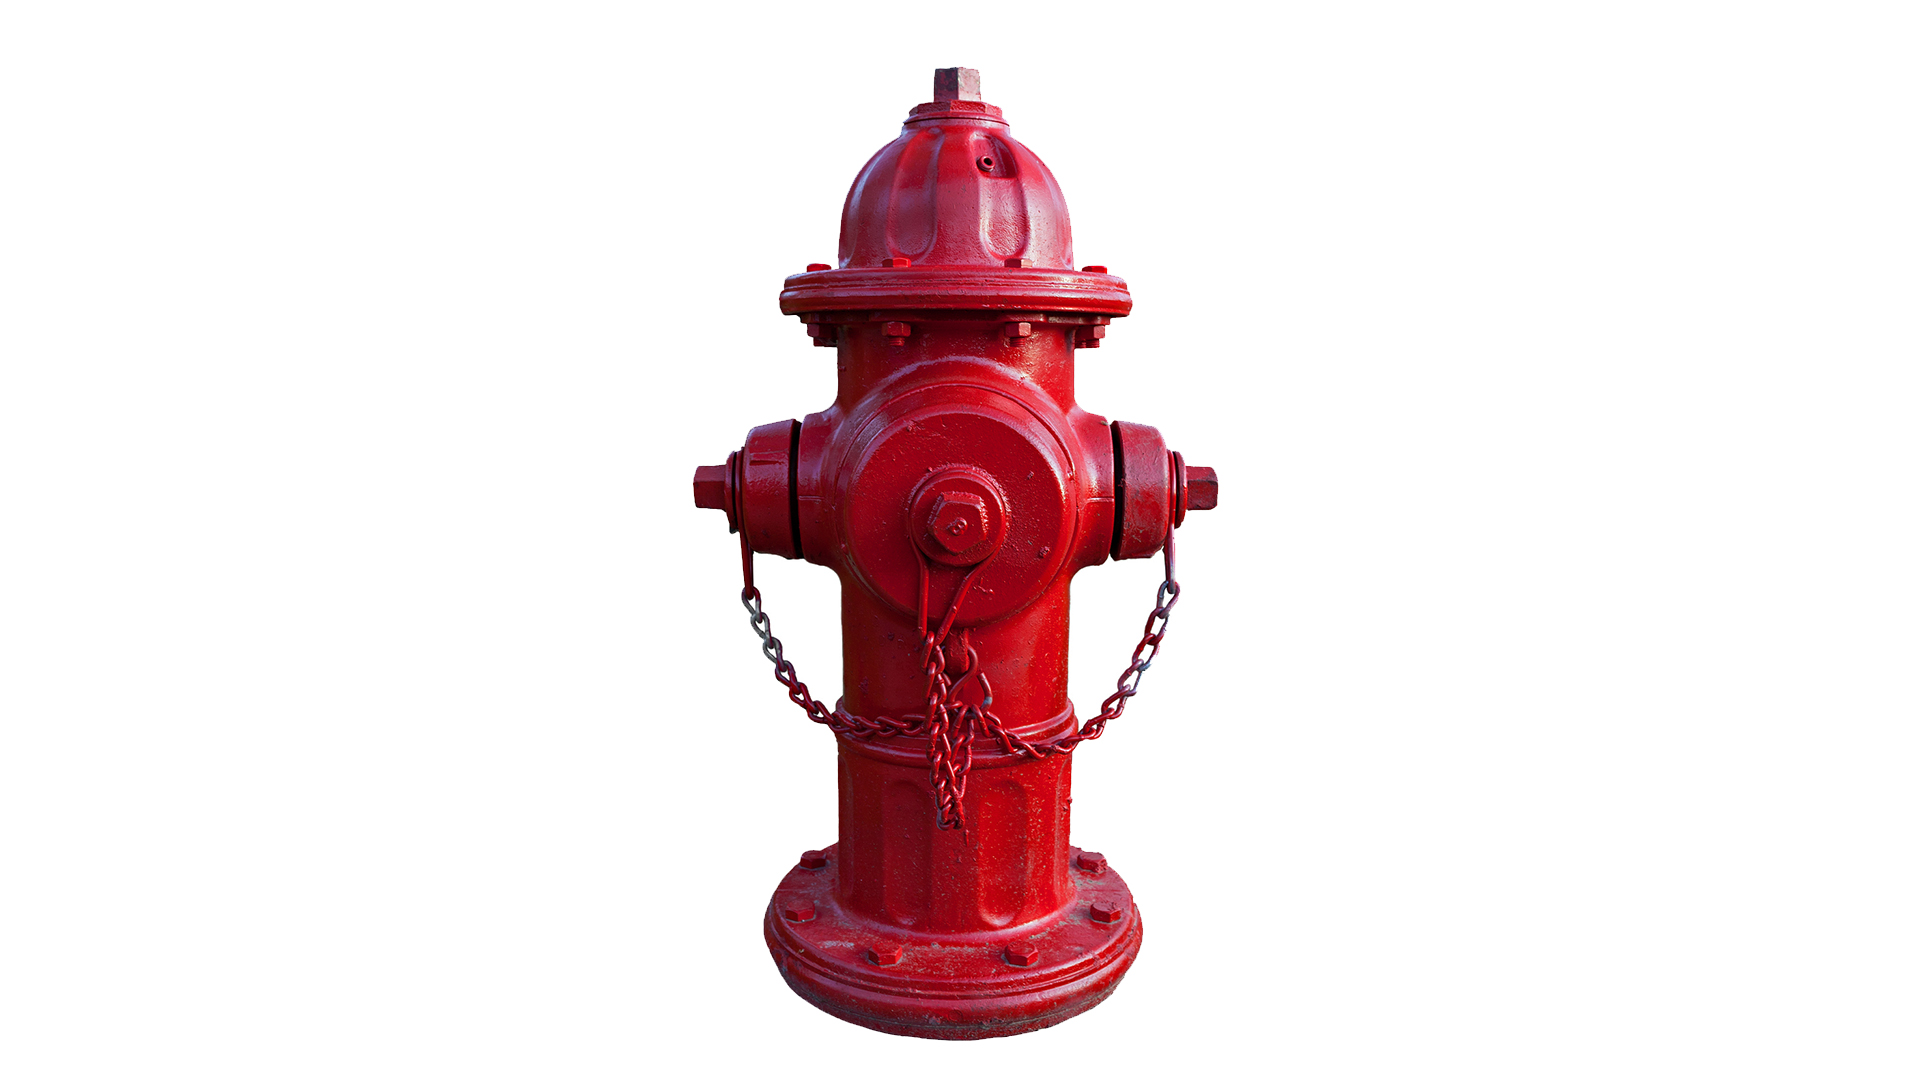 Fire hydrant 3